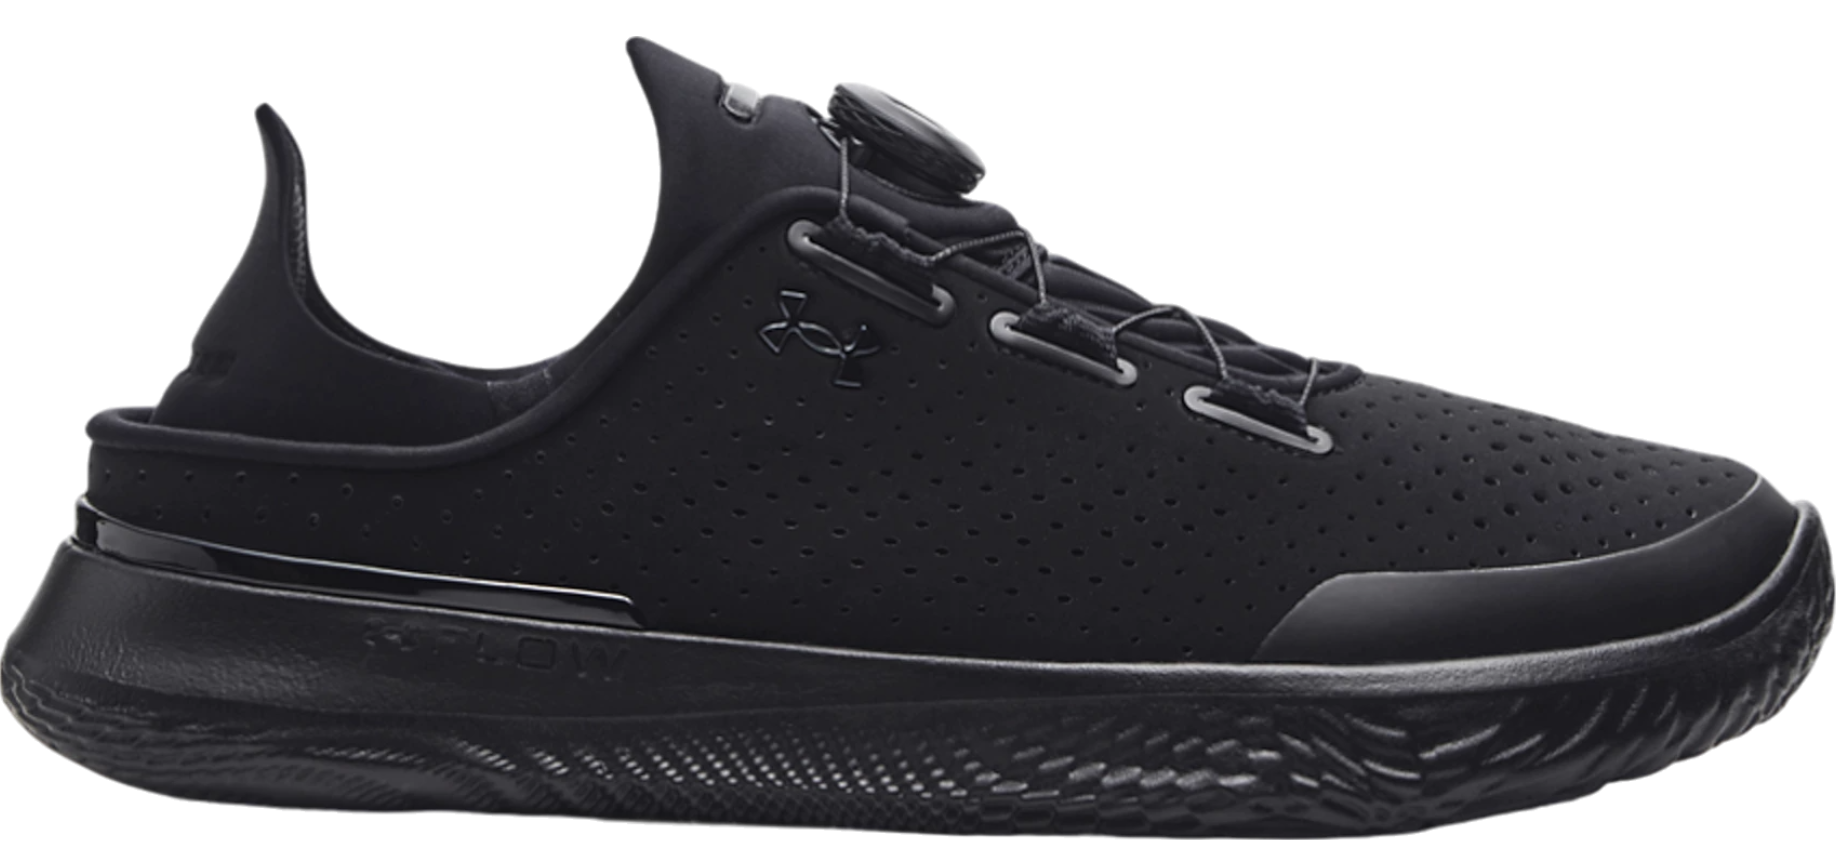 Chaussures de fitness Under Armour UA Flow Slipspeed Trainer NB